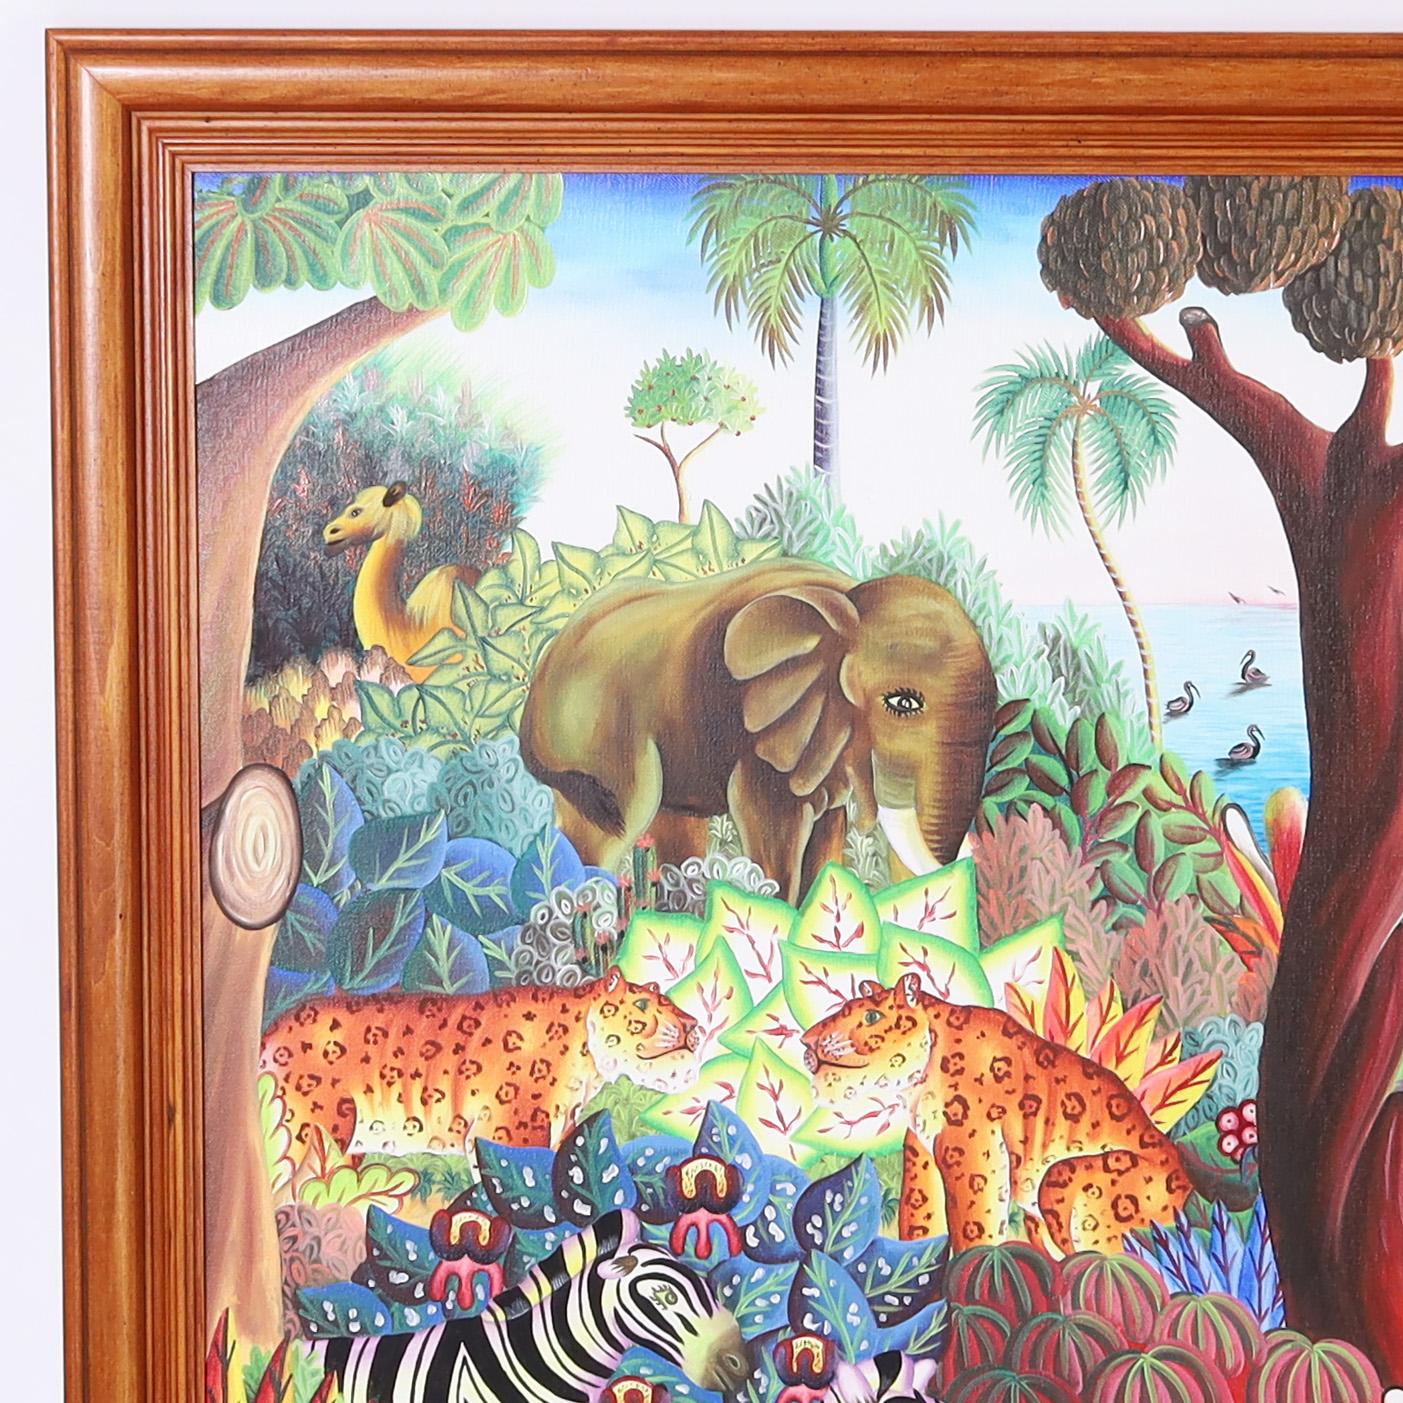 Large striking Haitian acrylic painting on canvas of a lush jungle scene with animals, trees and flowers, executed in a distinctive naive style, signed by noted artist Jerome Polycarpe and presented in a wood frame.